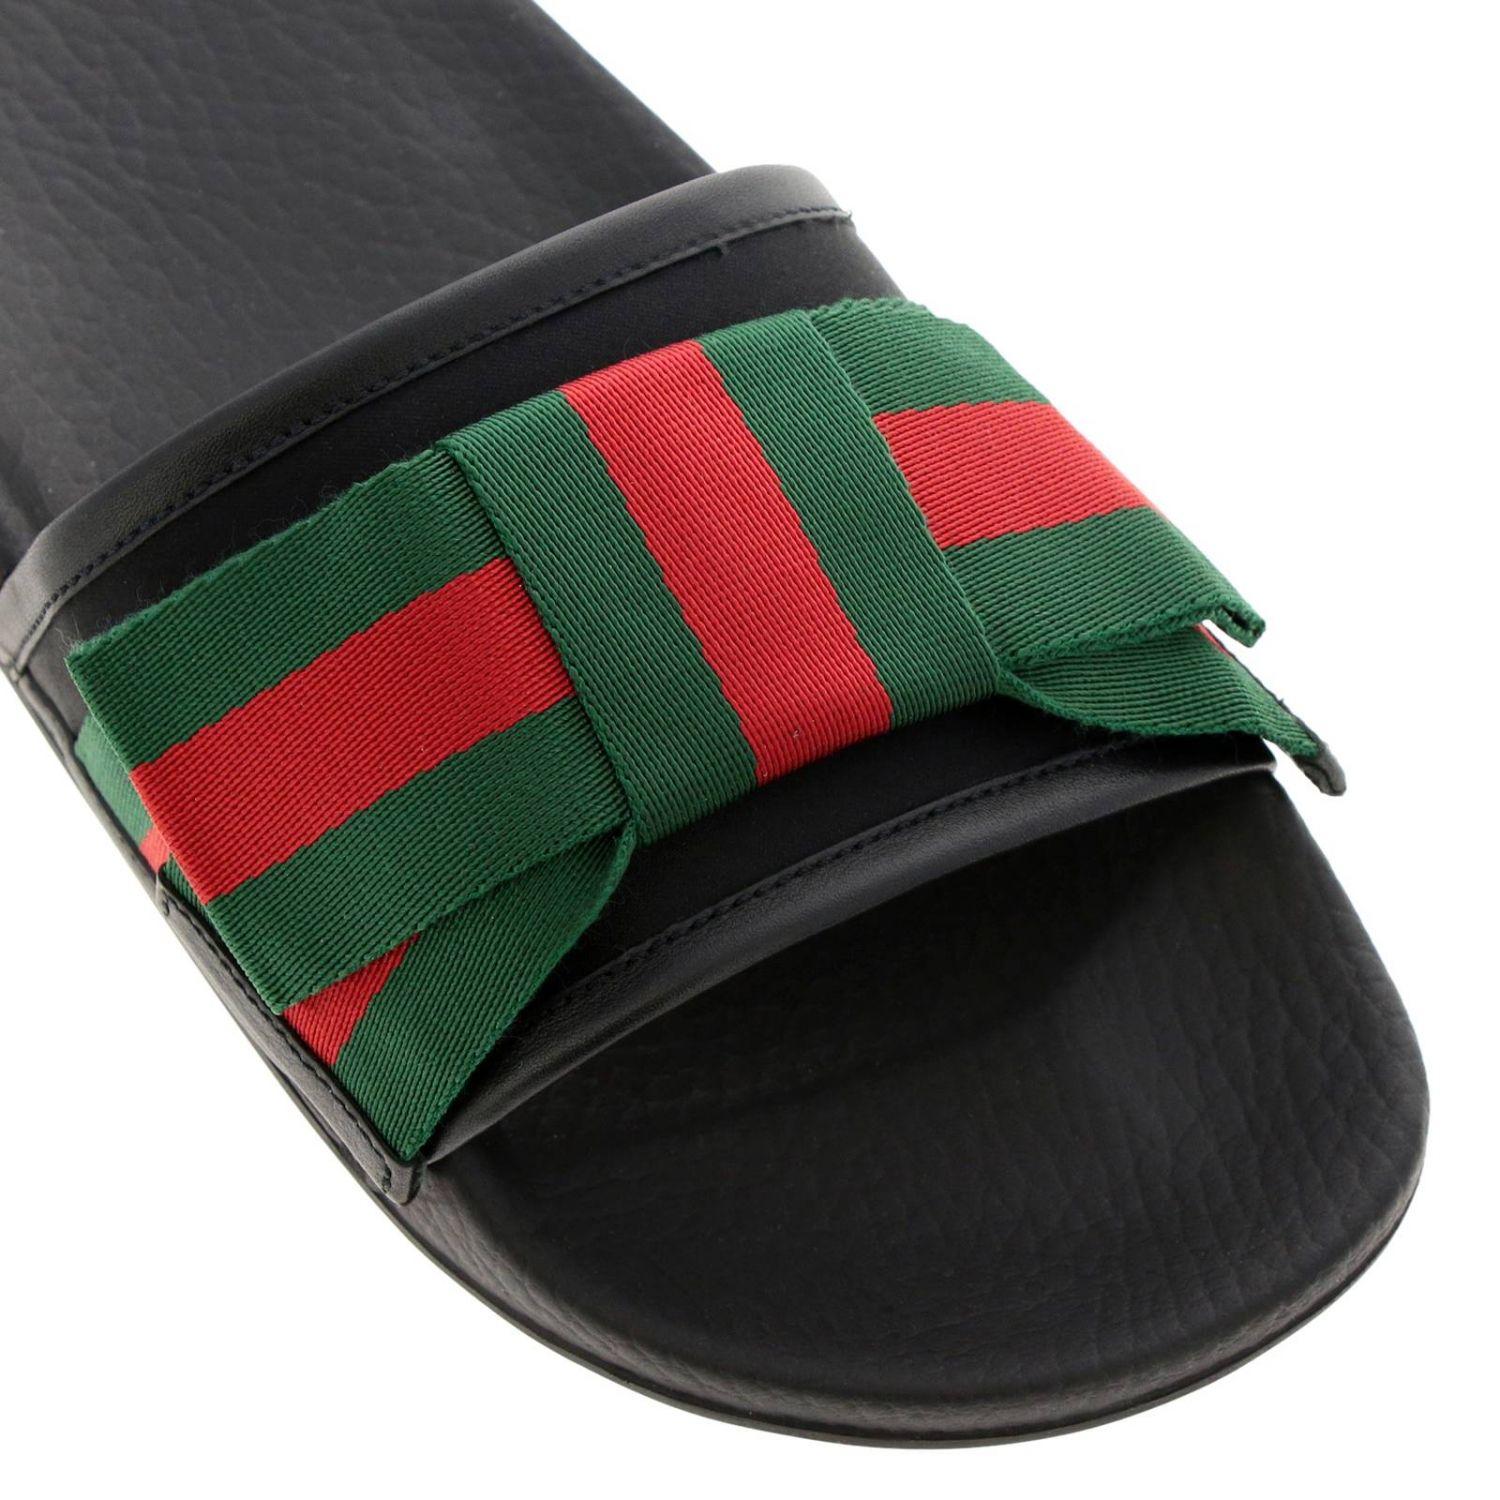 gucci slides green and red